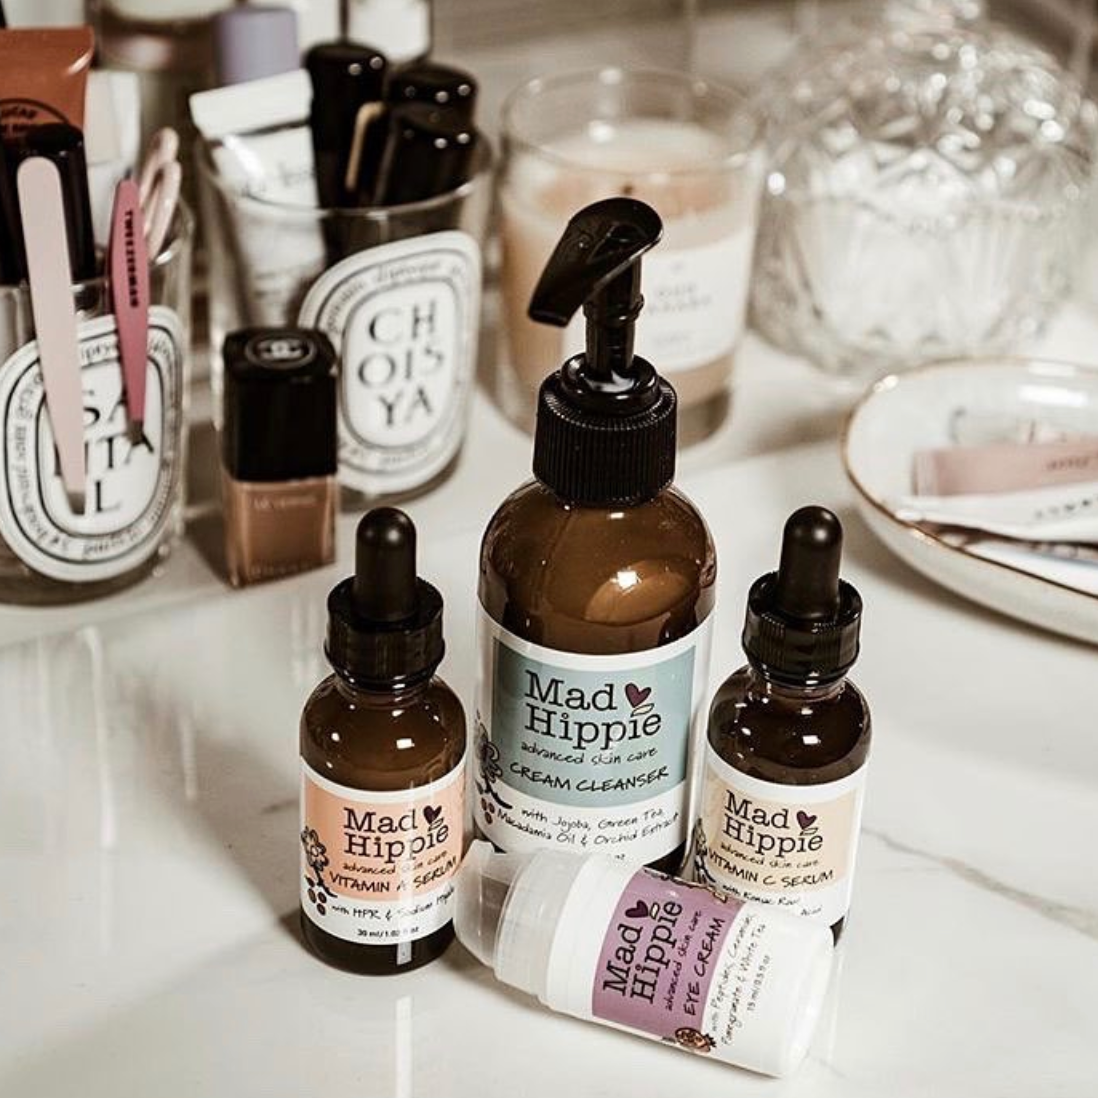 Get Glowing with Mad Hippie's Range of Natural Creams